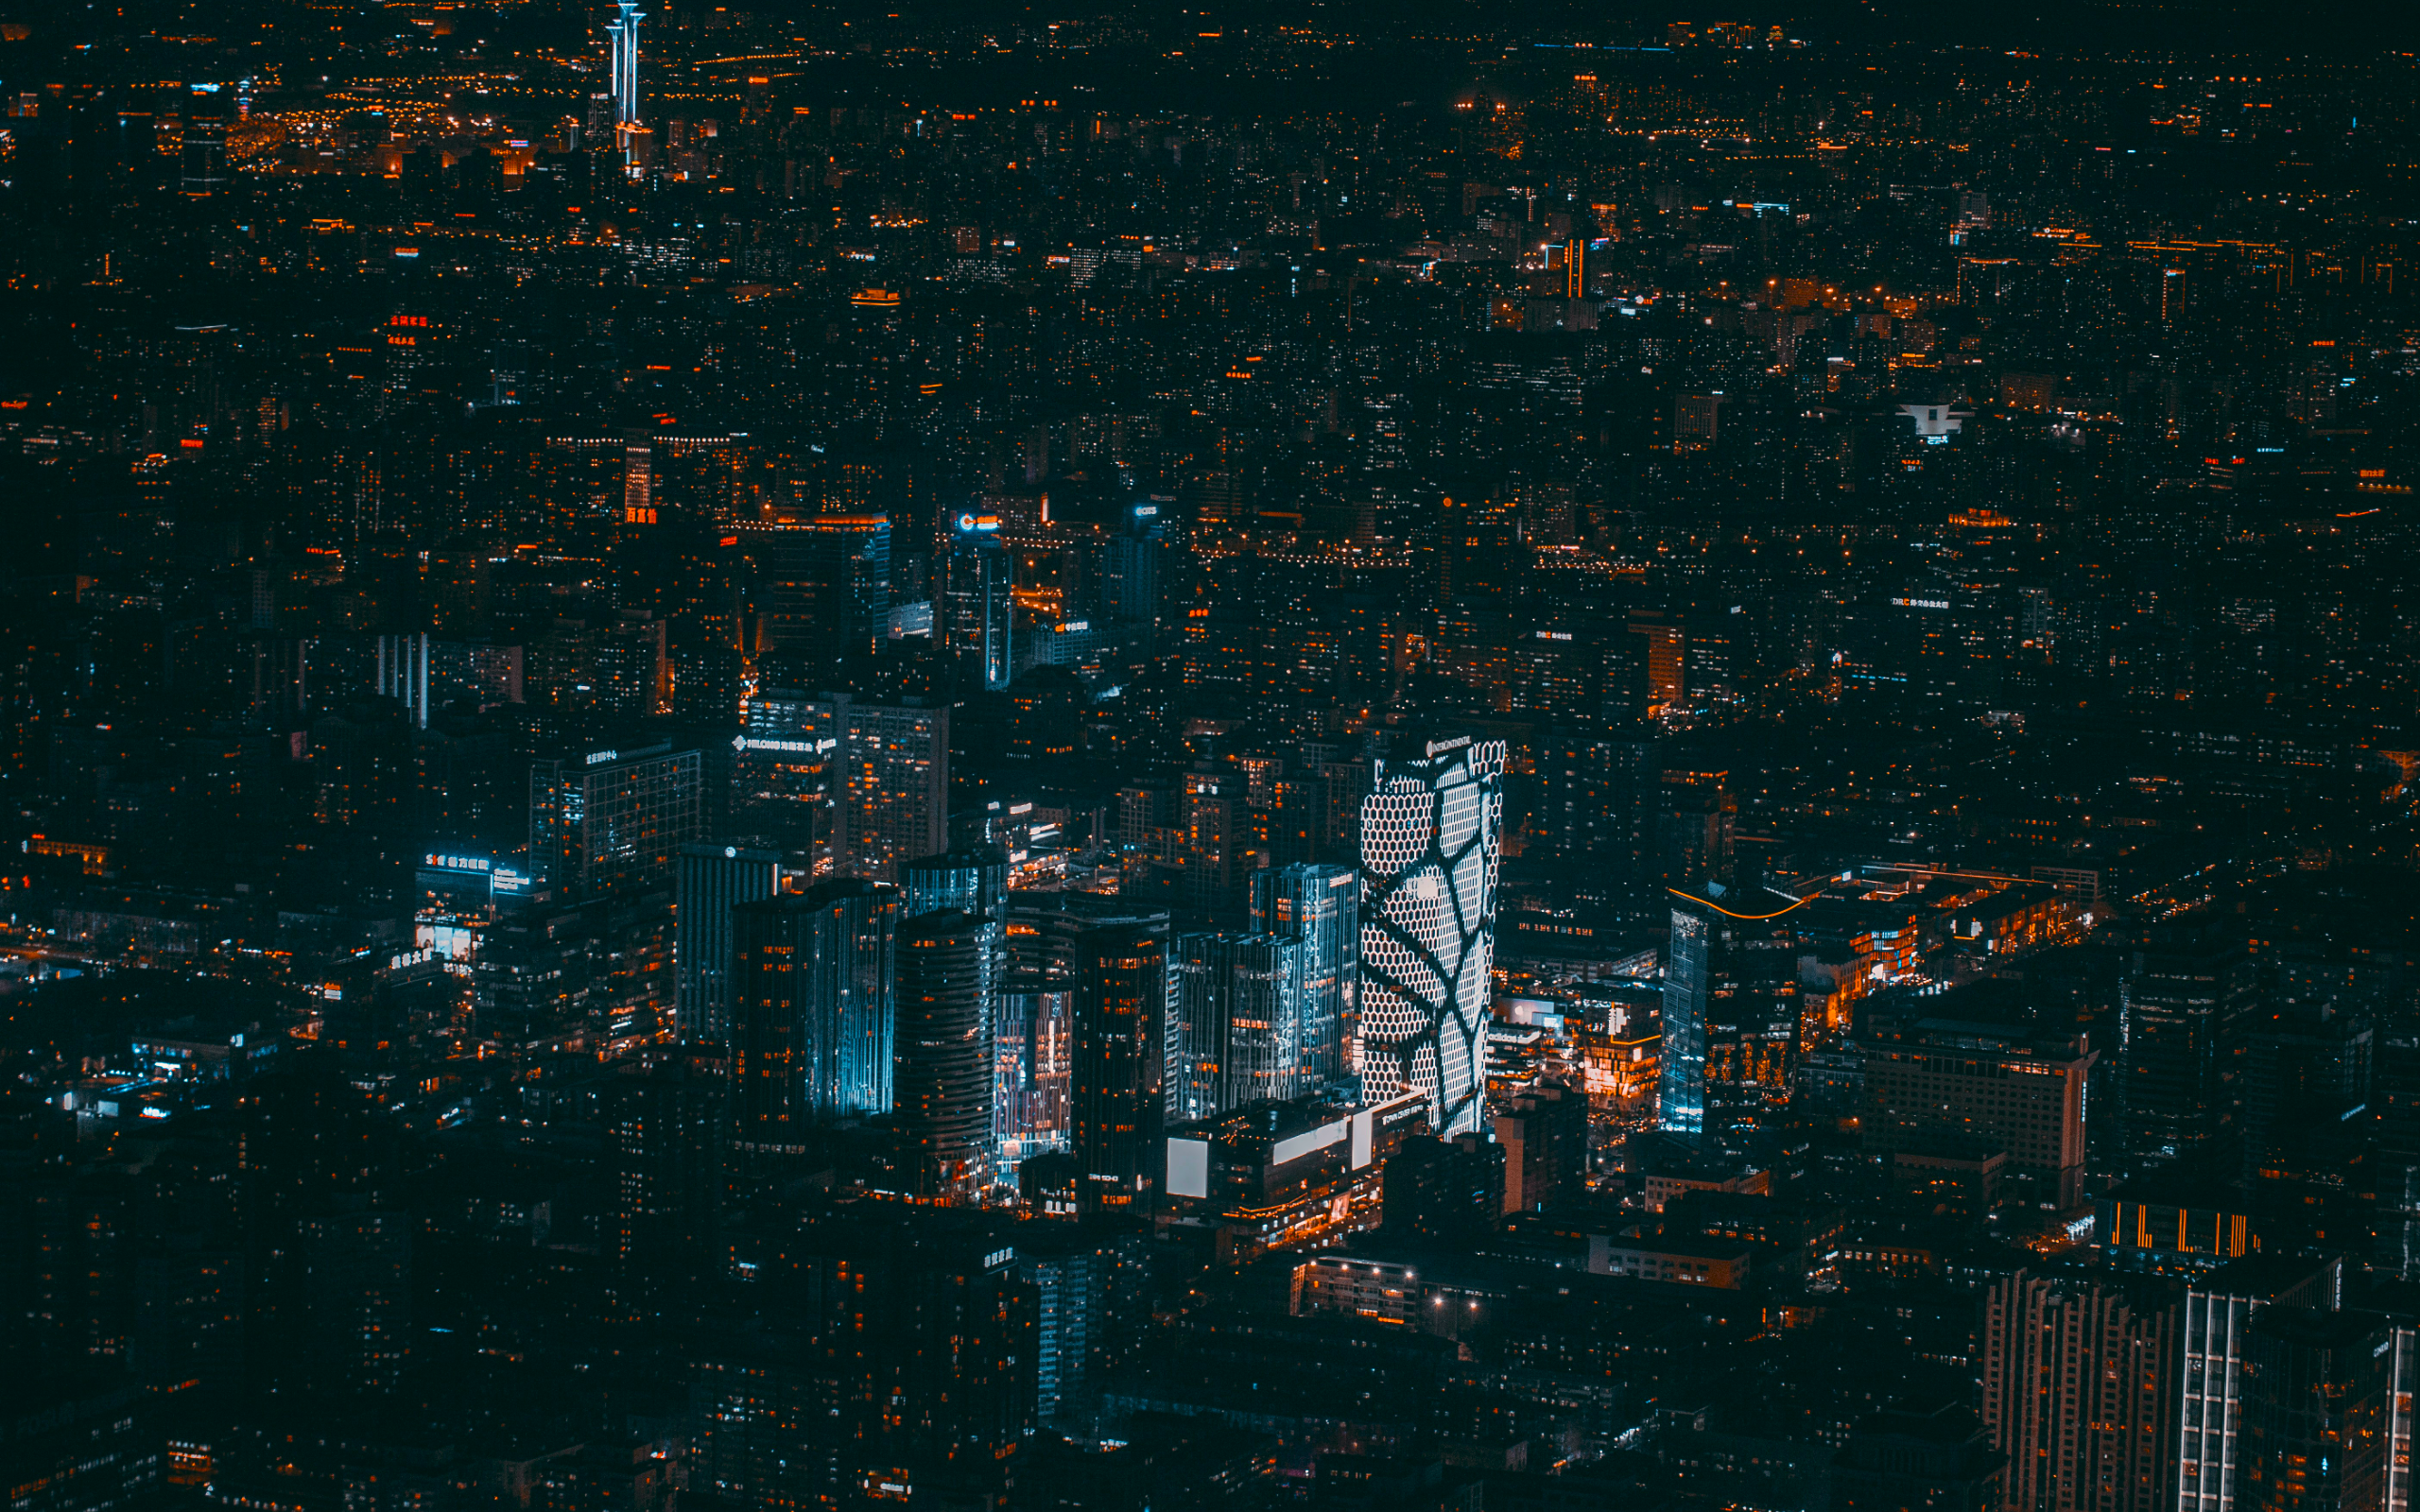 General 2560x1600 landscape night building apartments lights urban skyscraper low light city cityscape edit drone photo aerial view Beijing China